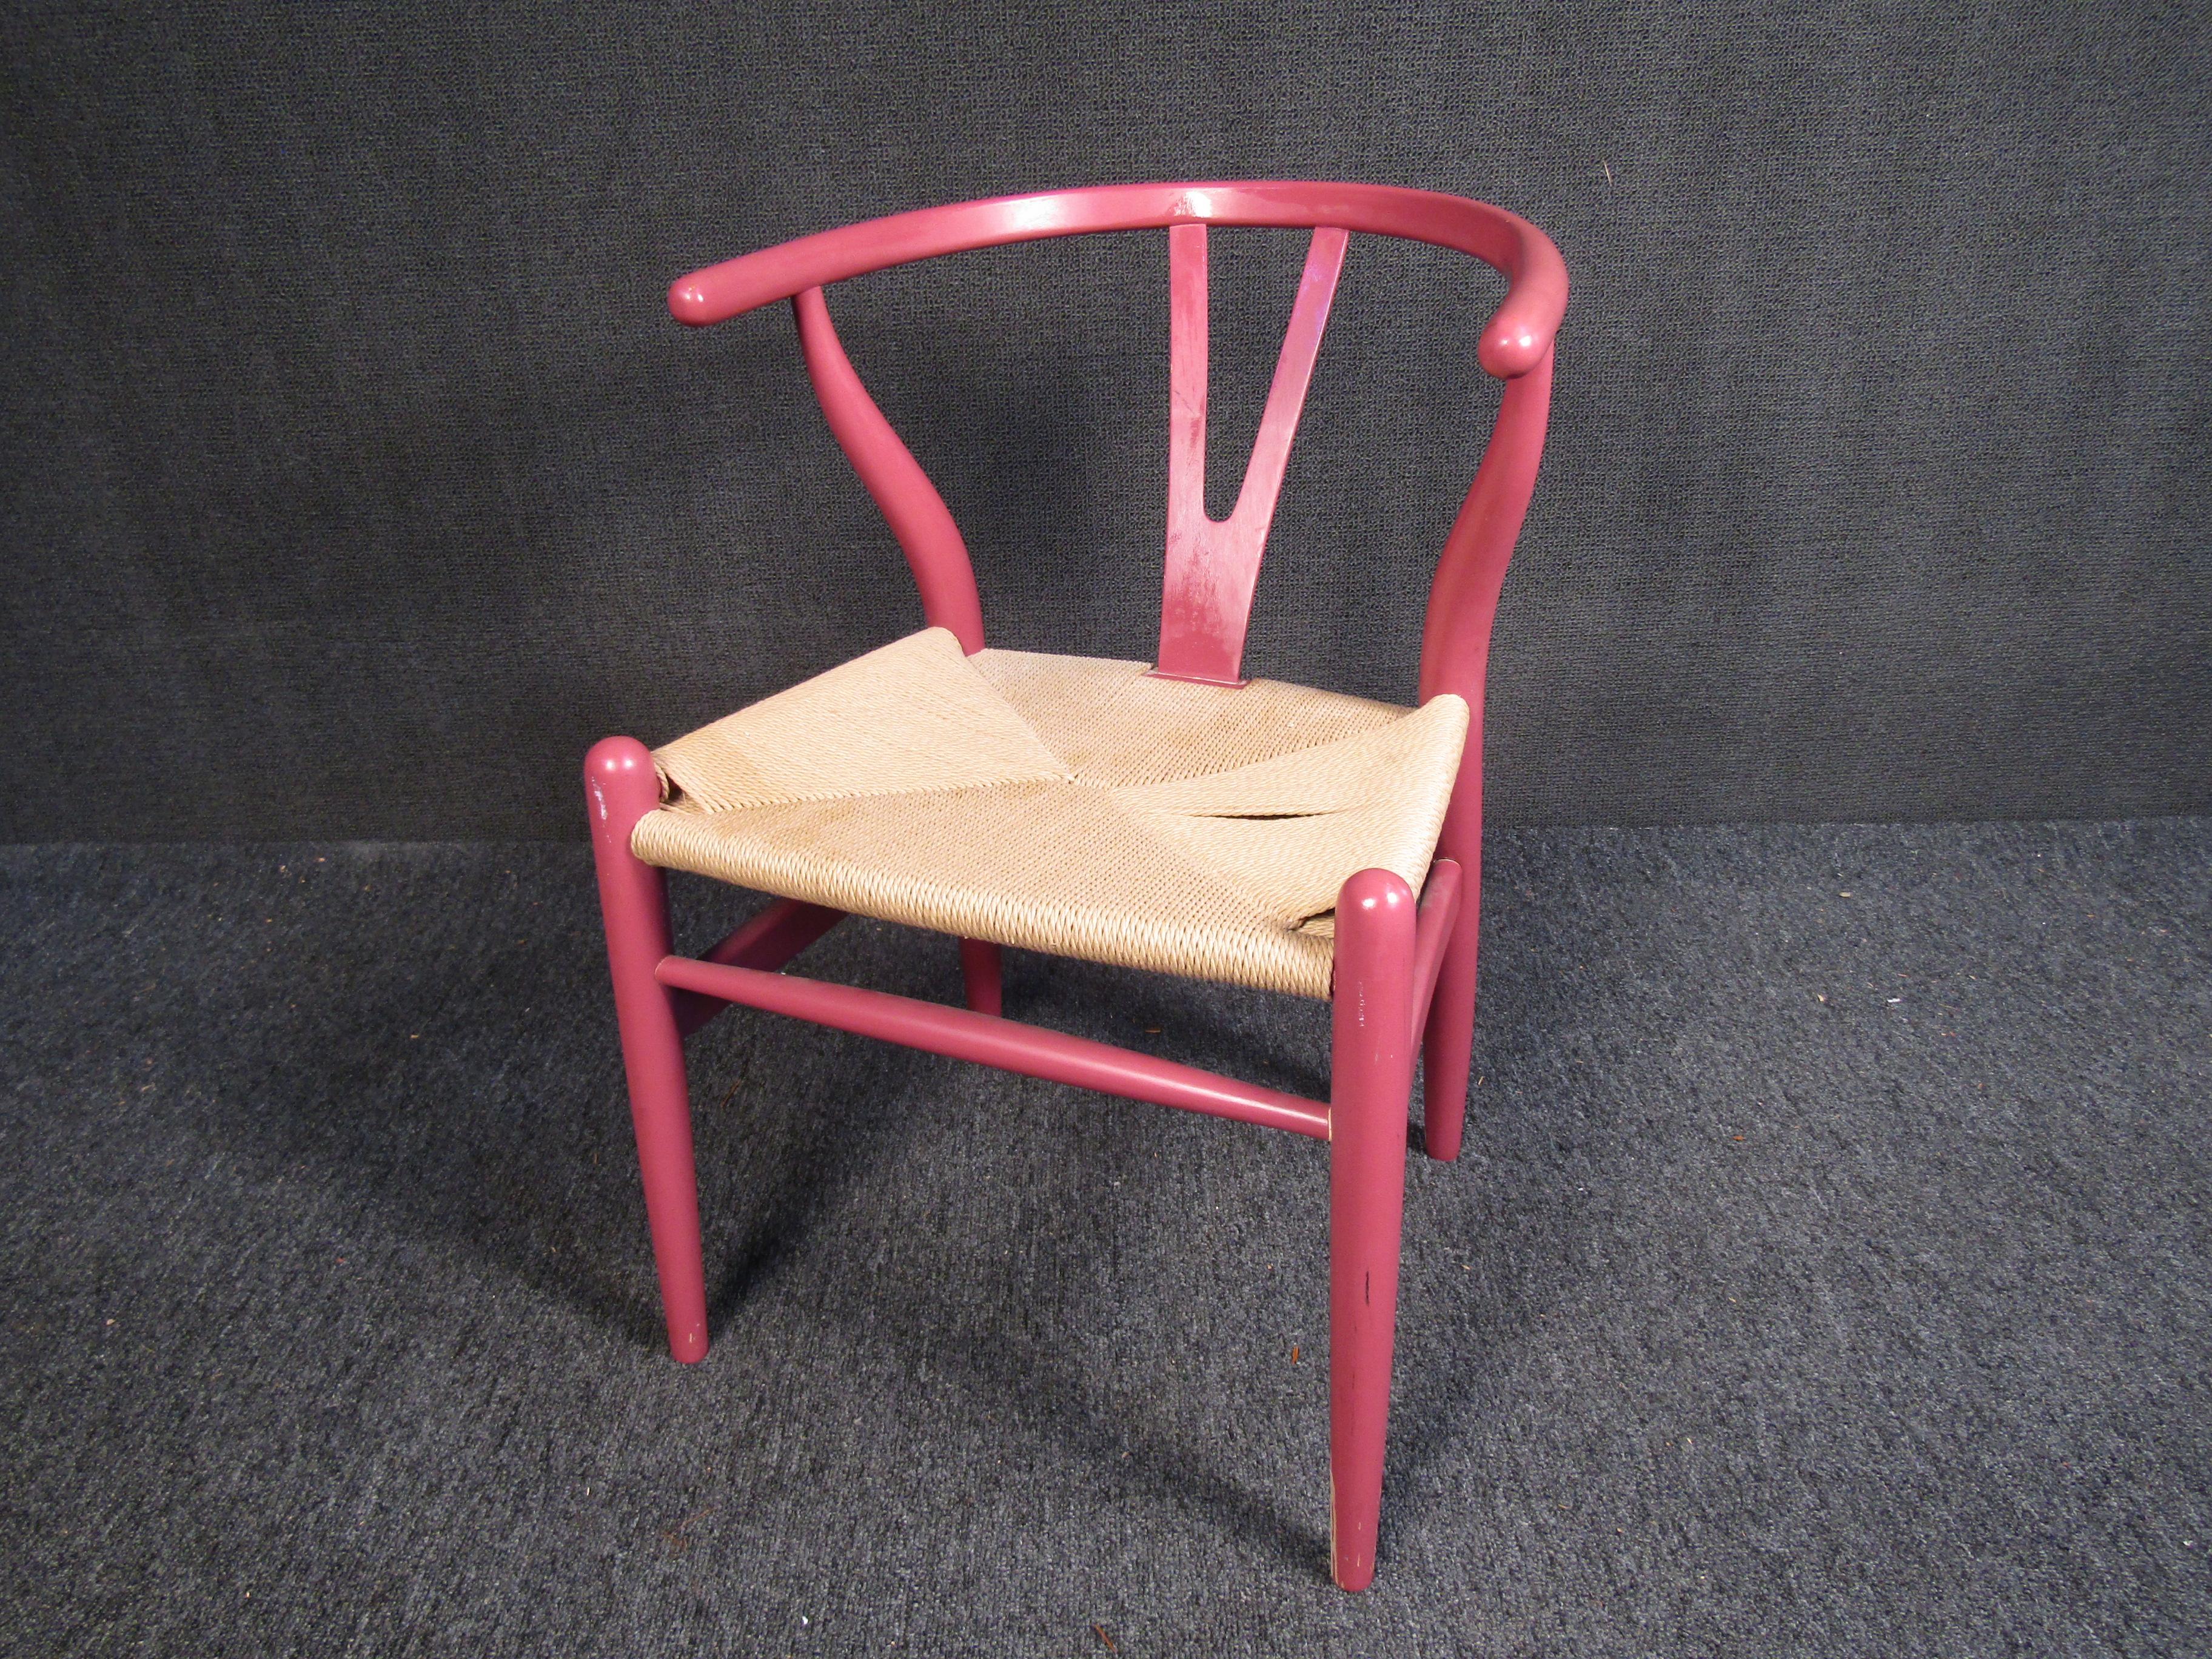 A colorful and unique chair styled after Hans Wegner's iconic Wishbone design. This chair is full of Mid-Century Modern style and is sure to brighten up any space. Please confirm item location with seller (NY/NJ).